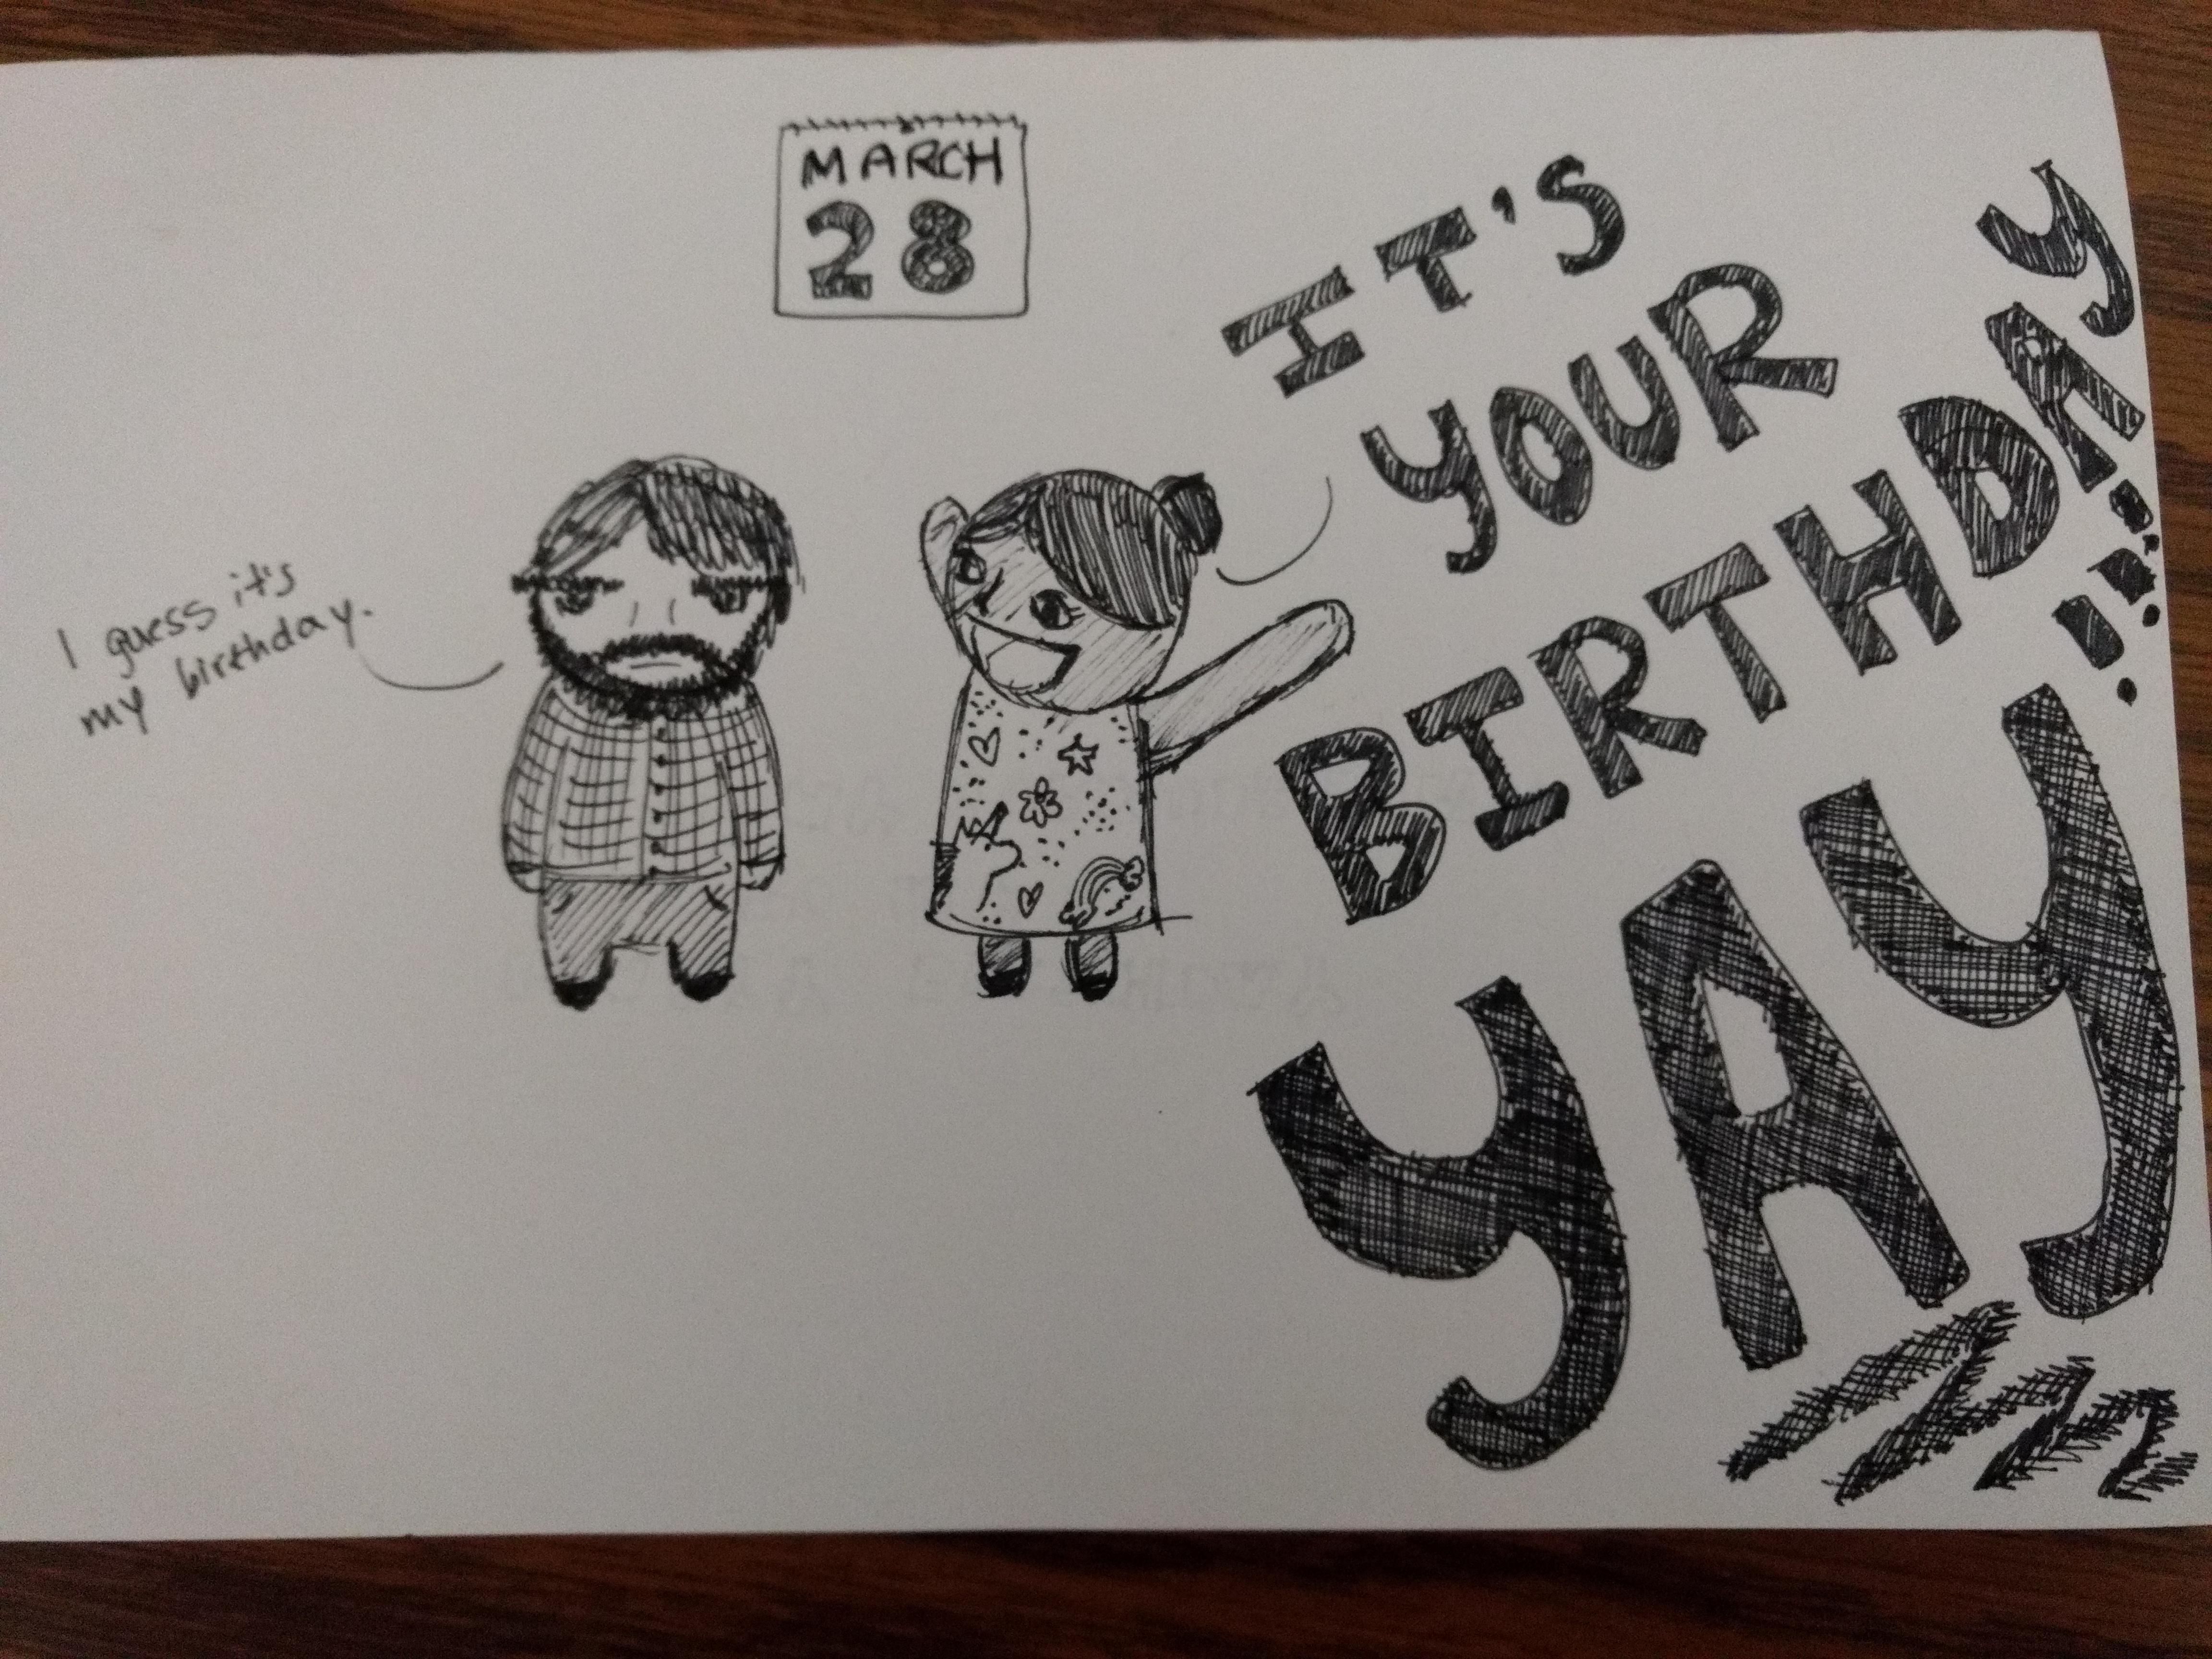 Today is my birthday. My girlfriend made a card depicting our excitement levels